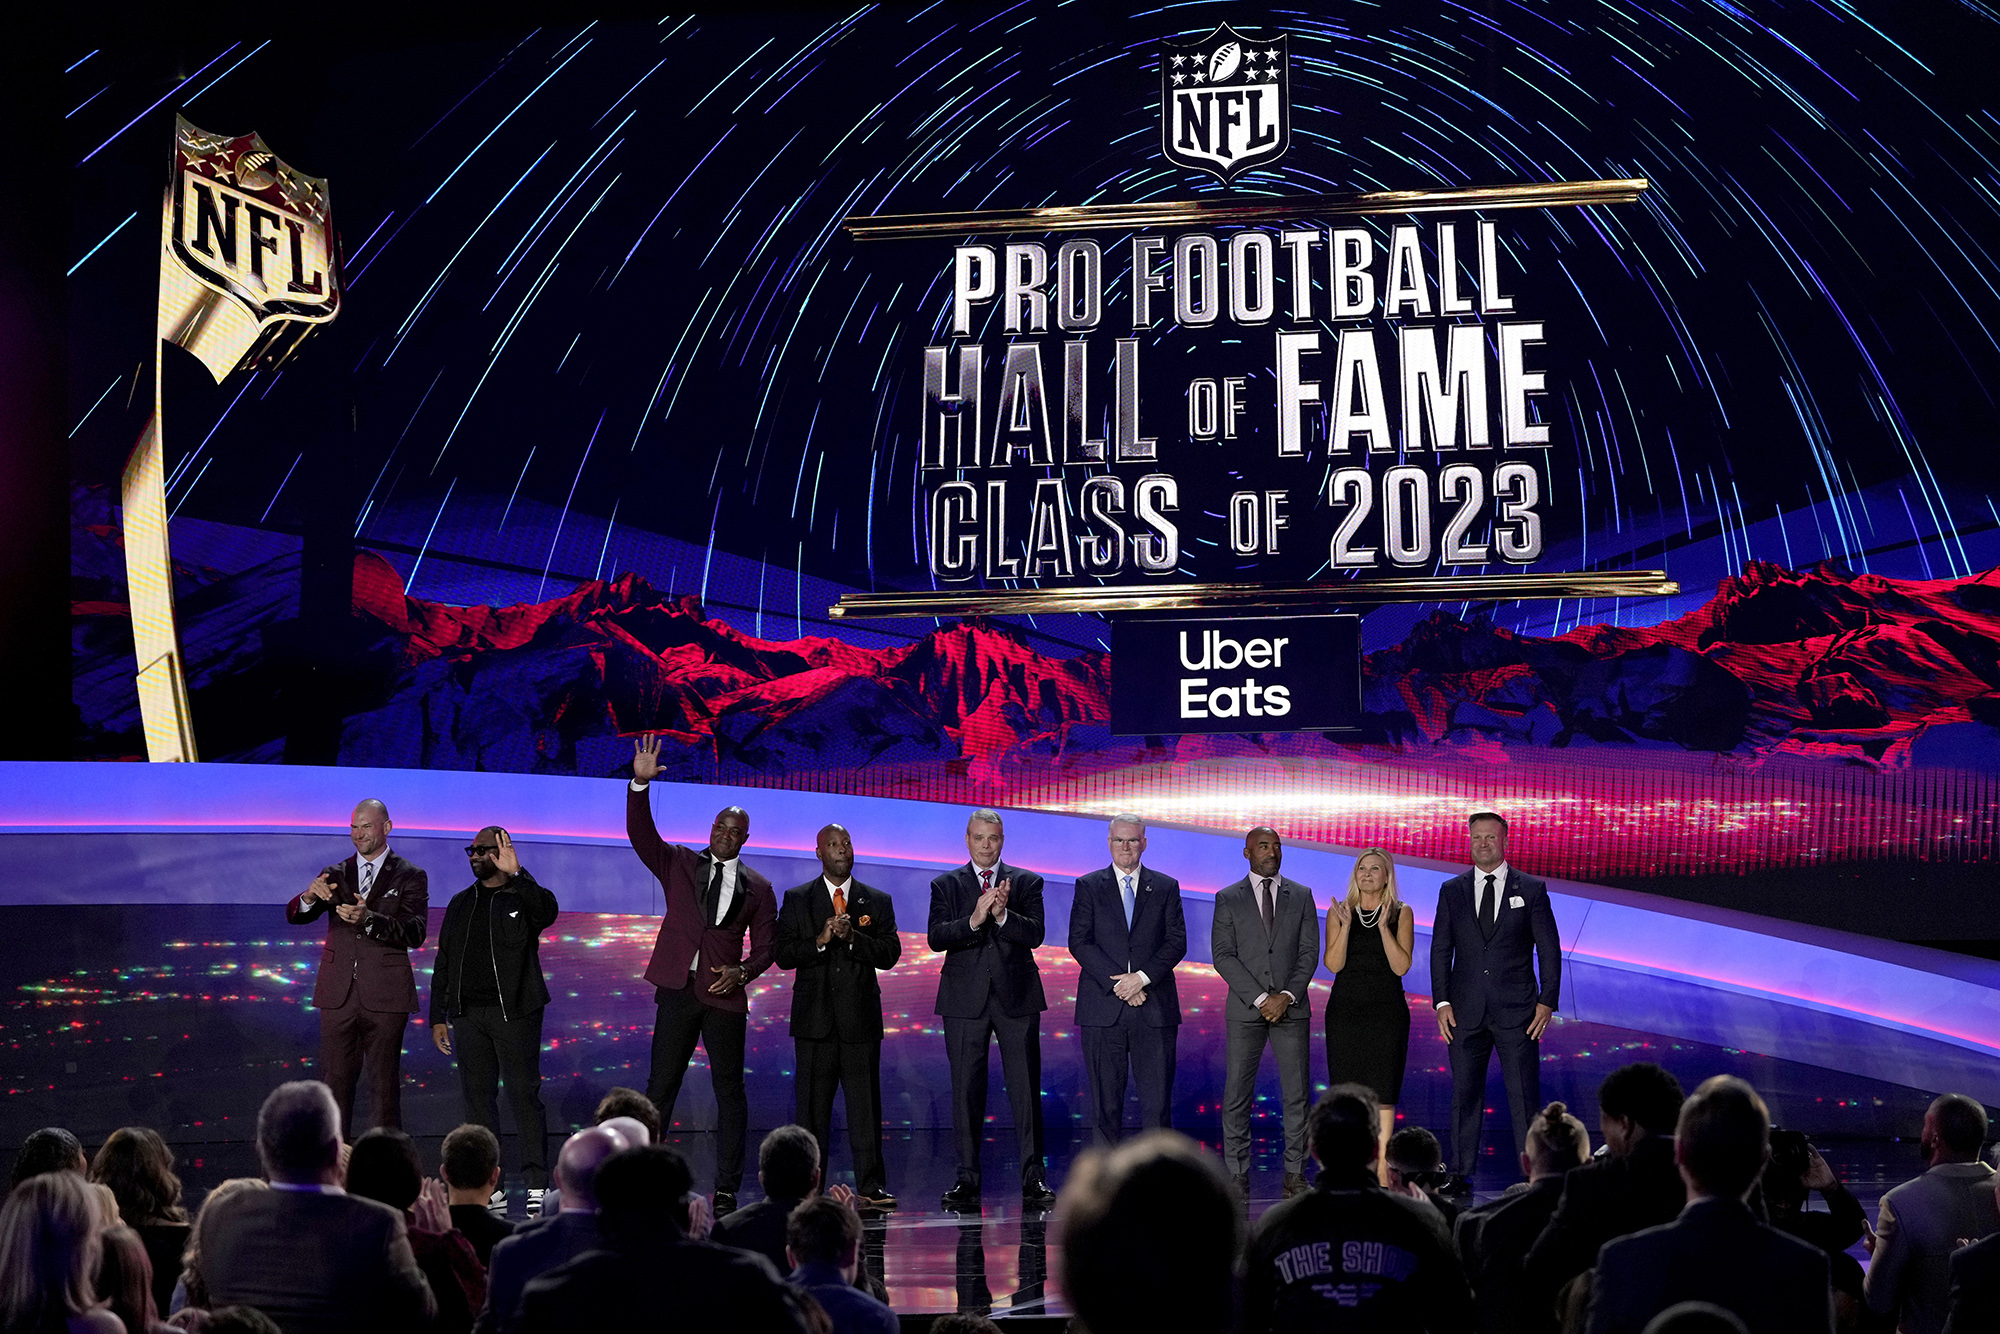 The Pro football Hall of Fame class of 2023 poses during the NFL Honors award show ahead of the Super Bowl 57 football game,Thursday, Feb. 9, 2023, in Phoenix. (AP Photo/David J.